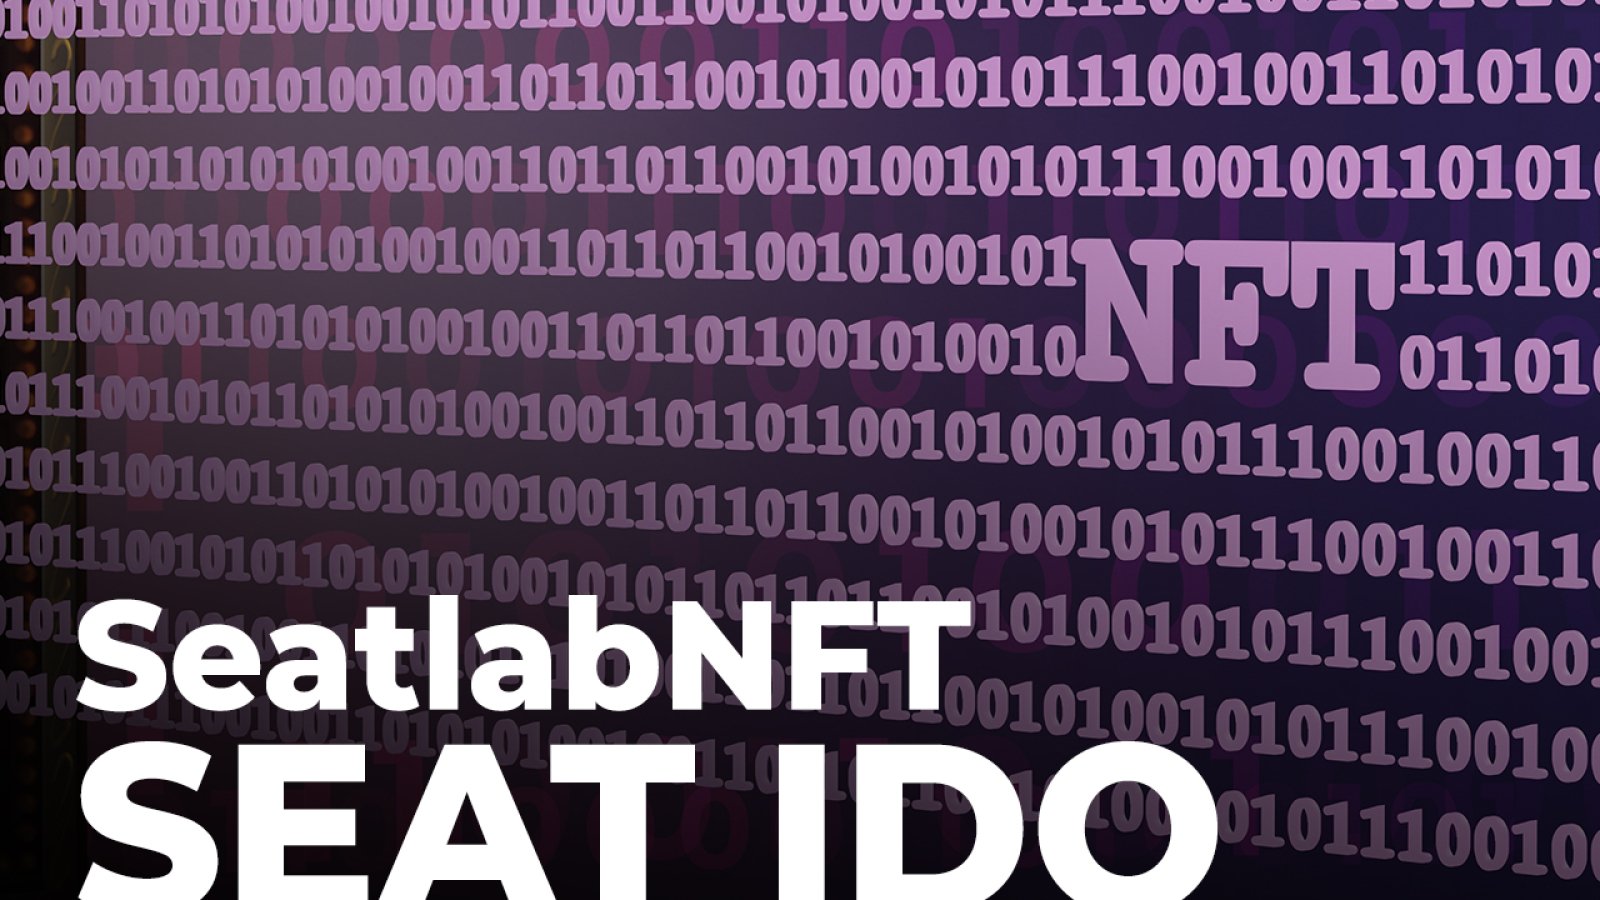 SeatlabNFT Announces SEAT IDO, Aims to Reform Tickets Industry